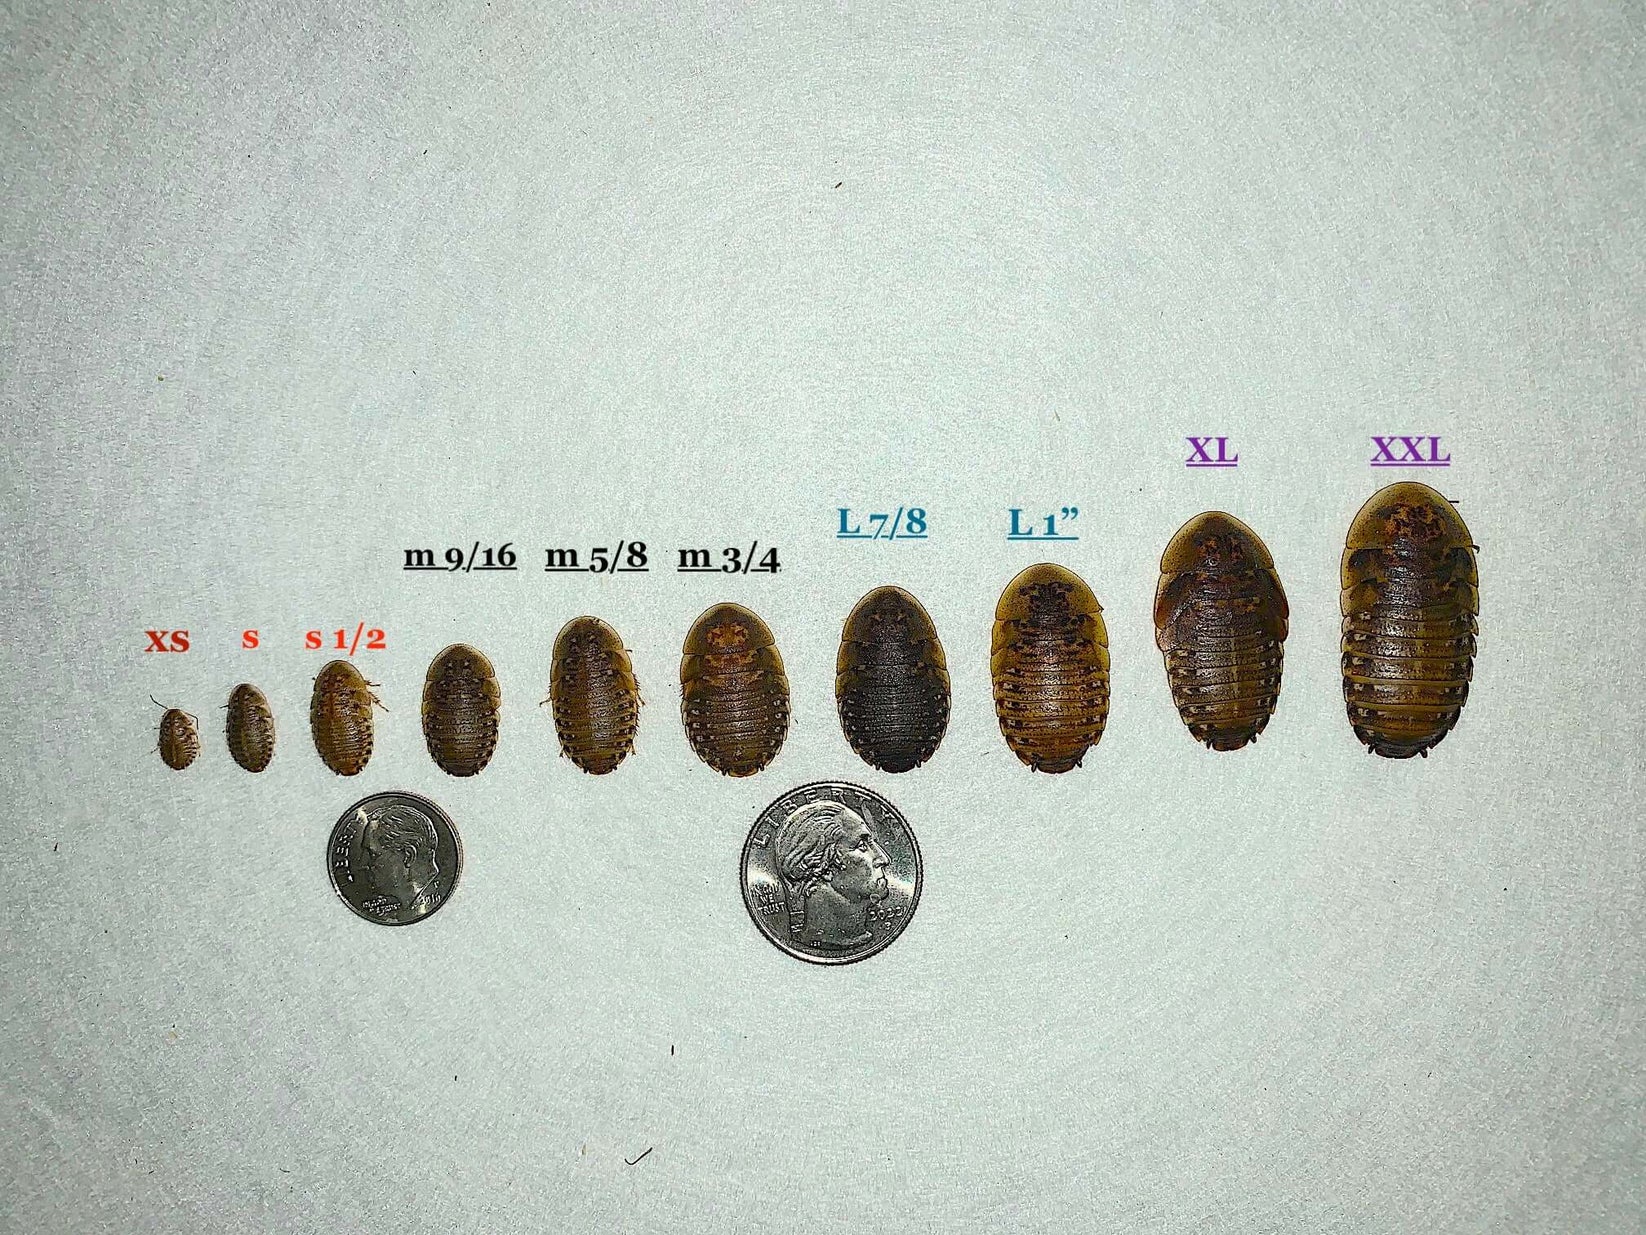 Dubia Roaches All Sizes One Place